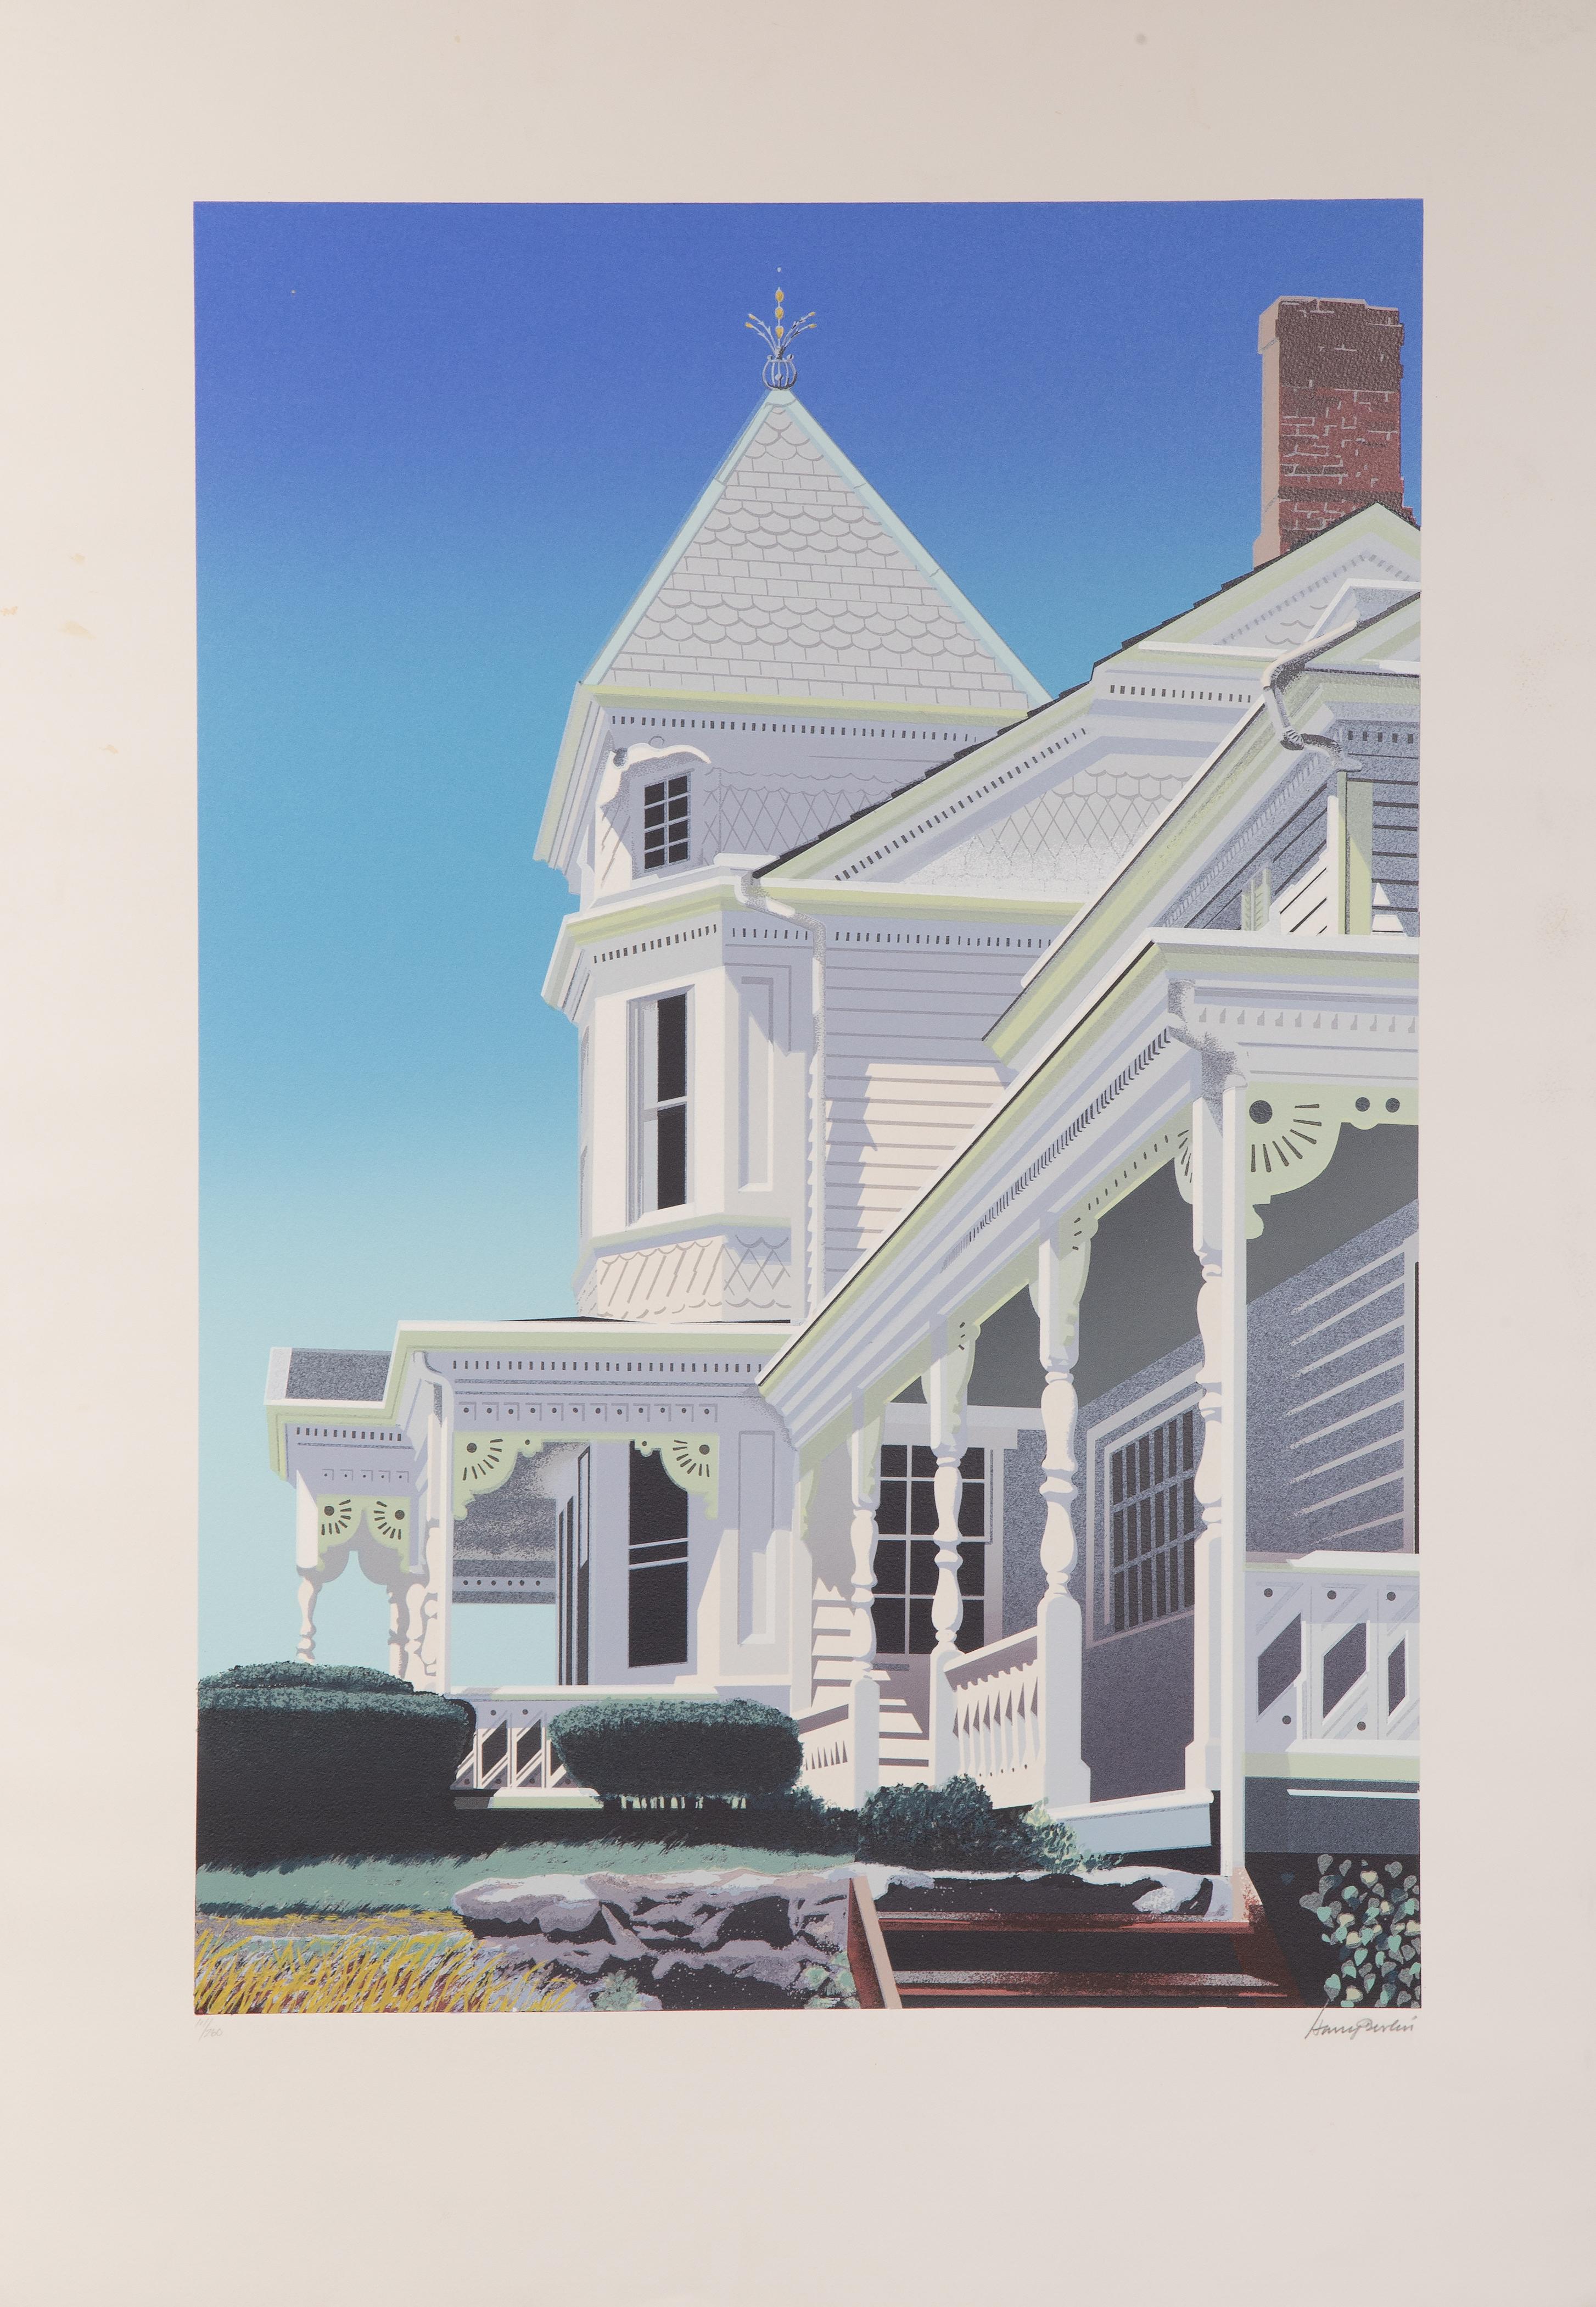 Victorian House Facade
Harry Devlin, American (1918–2001)
Lithograph on Arches, signed and numbered in pencil
Edition of 111/260
Image Size: 32 x 22 inches
Size: 41.5 x 29.5 in. (105.41 x 74.93 cm)